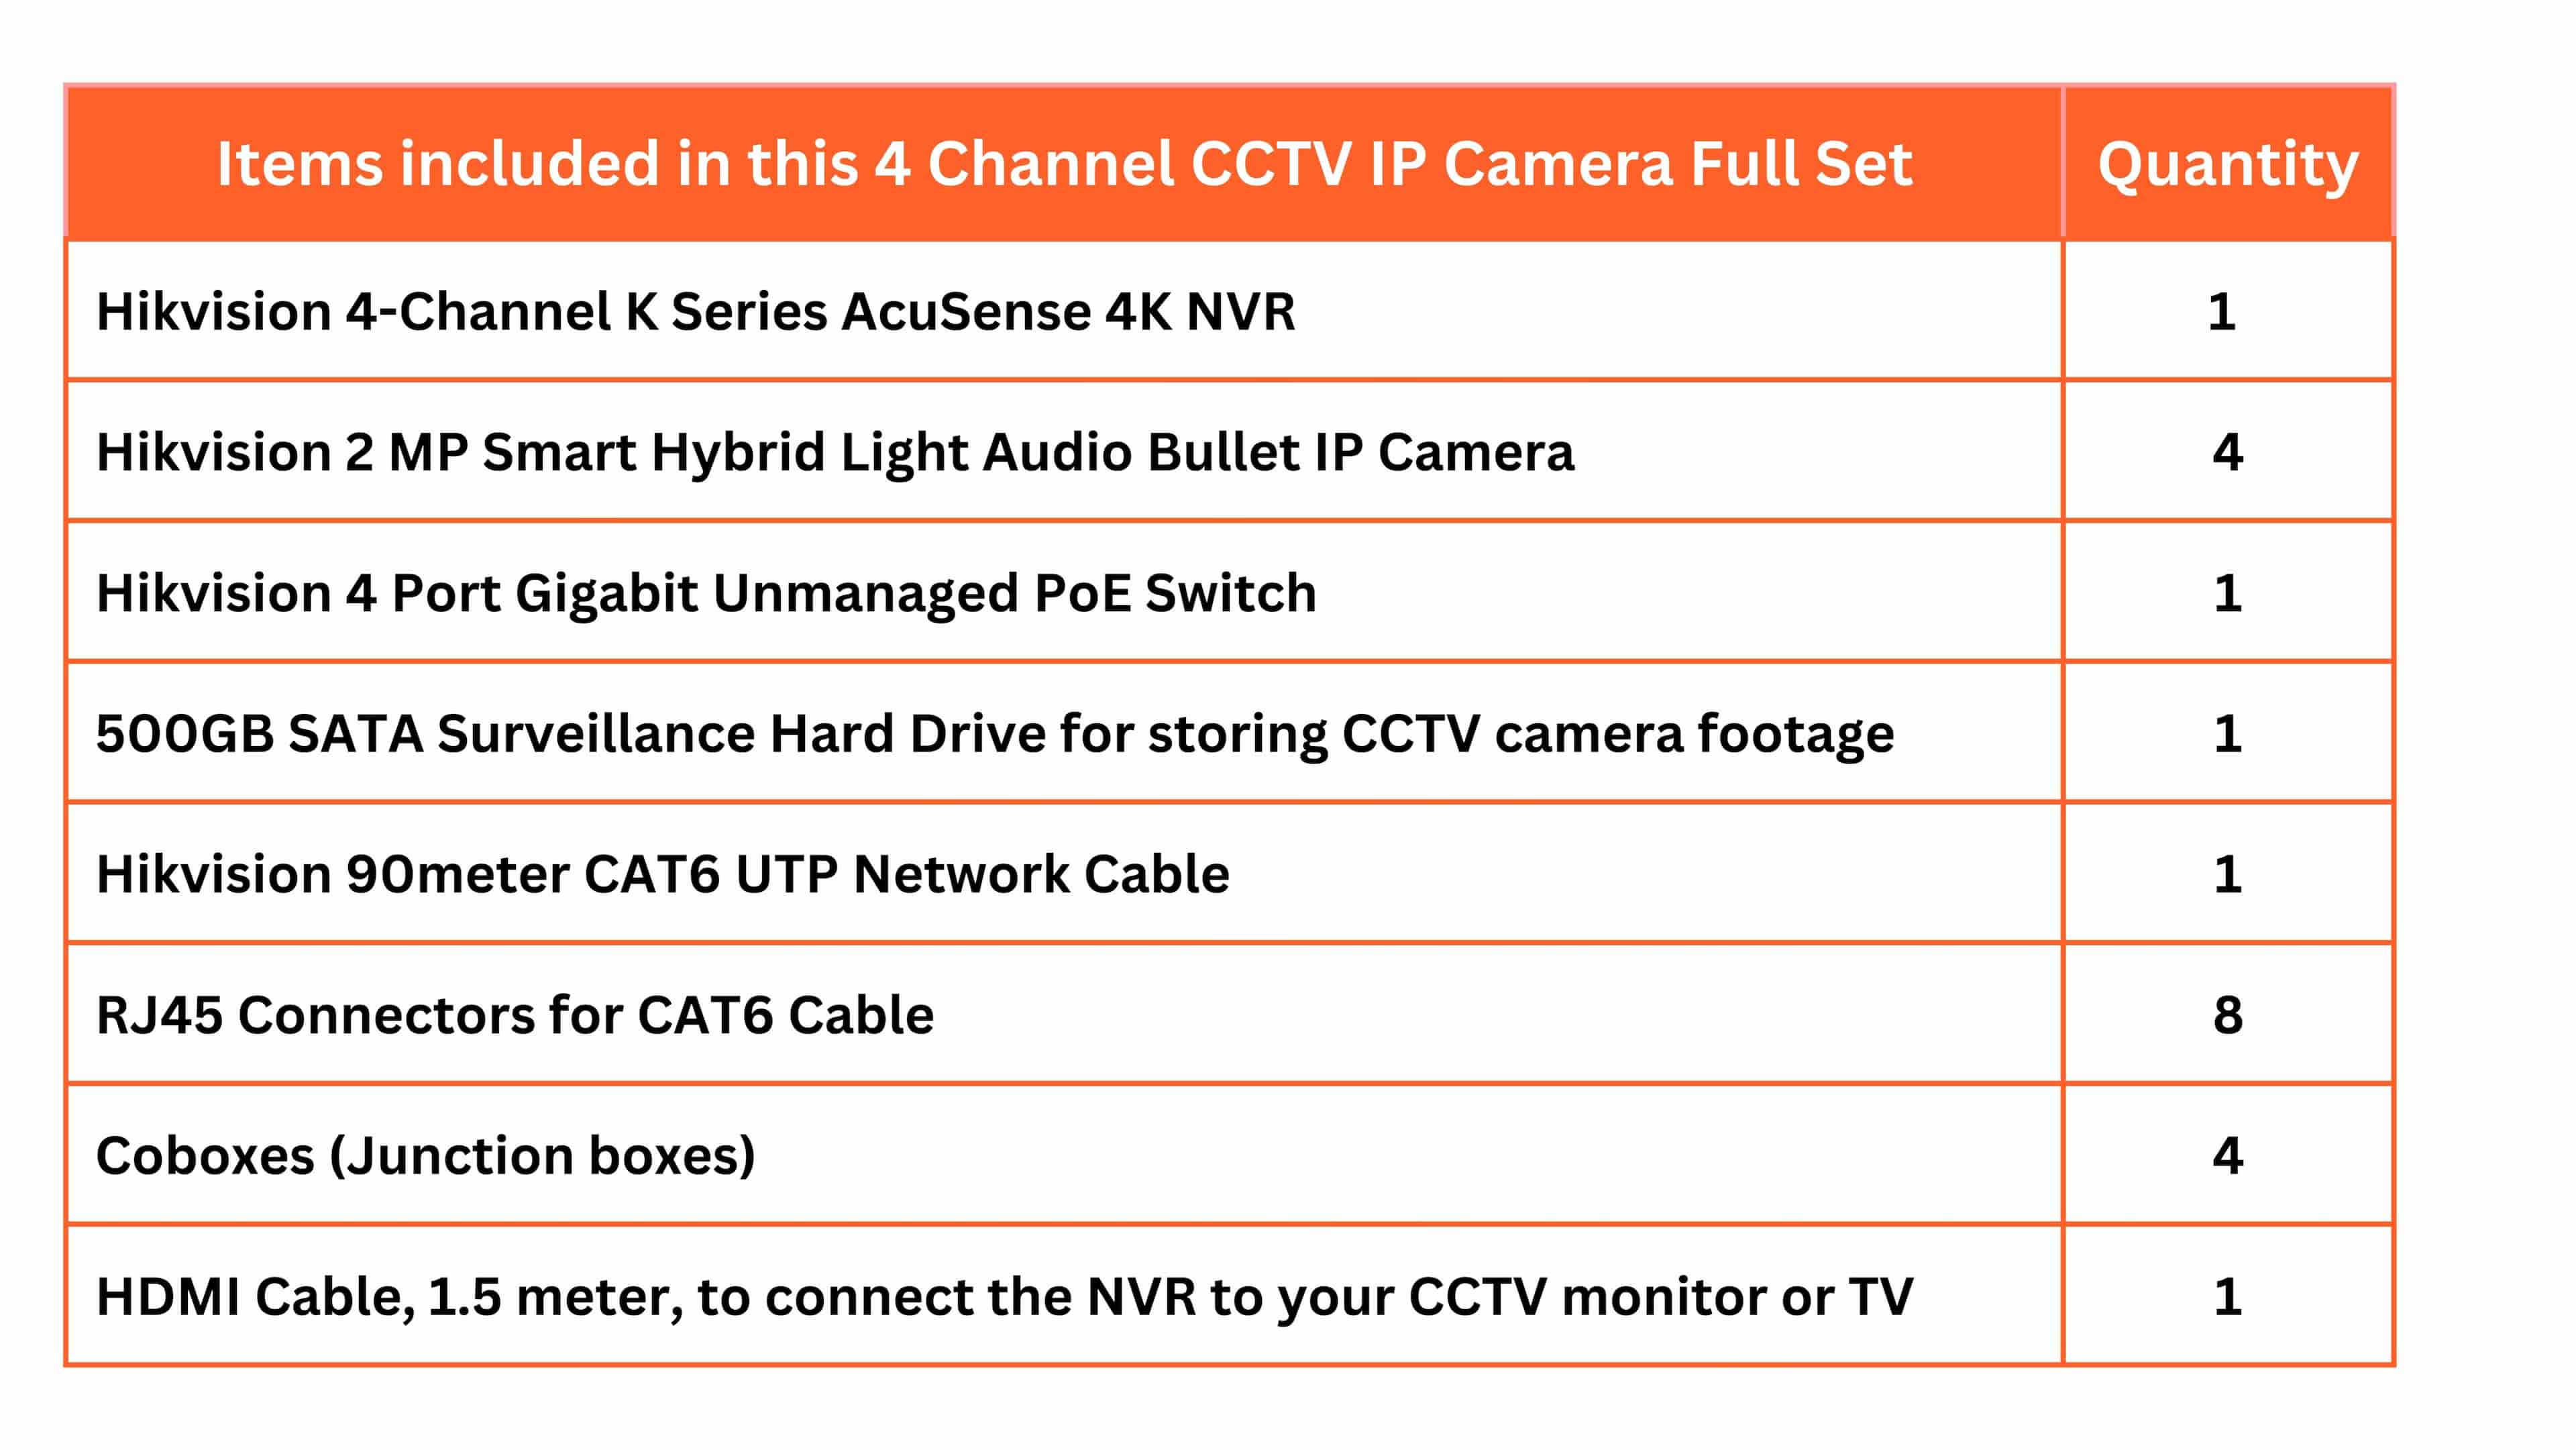 HIKVISION 4 CCTV IP Camera Full Set with 4 Channel 4K NVR, 4 × 2MP Hybrid IP Camera, 4 Port PoE Switch, 500GB HDD, RJ45, Cobox, Cat6 90m & HDMI Cables